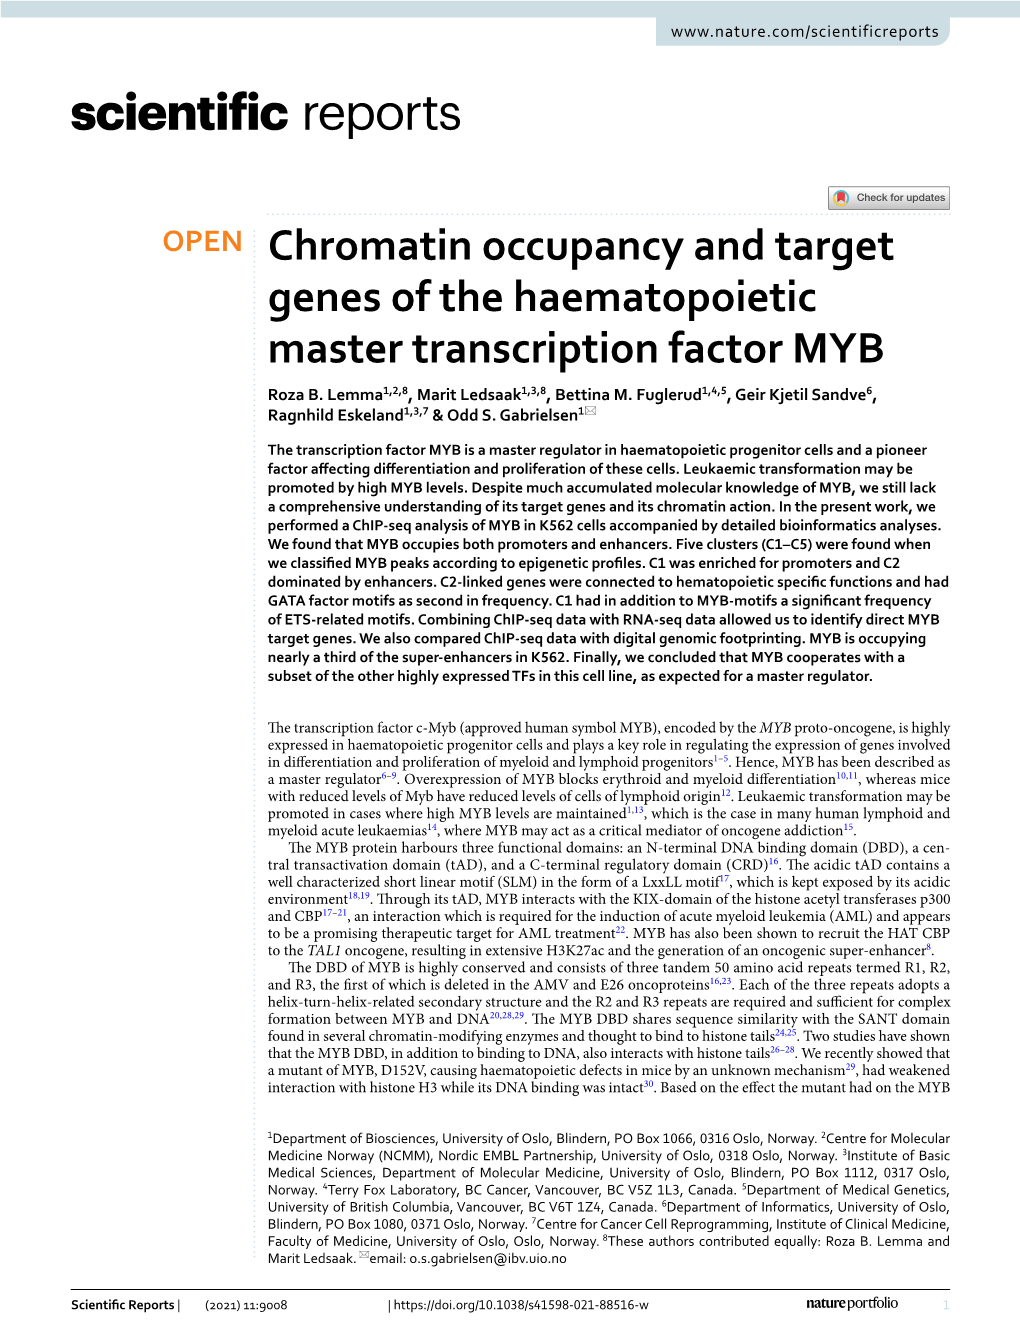 Chromatin Occupancy and Target Genes of the Haematopoietic Master Transcription Factor MYB Roza B